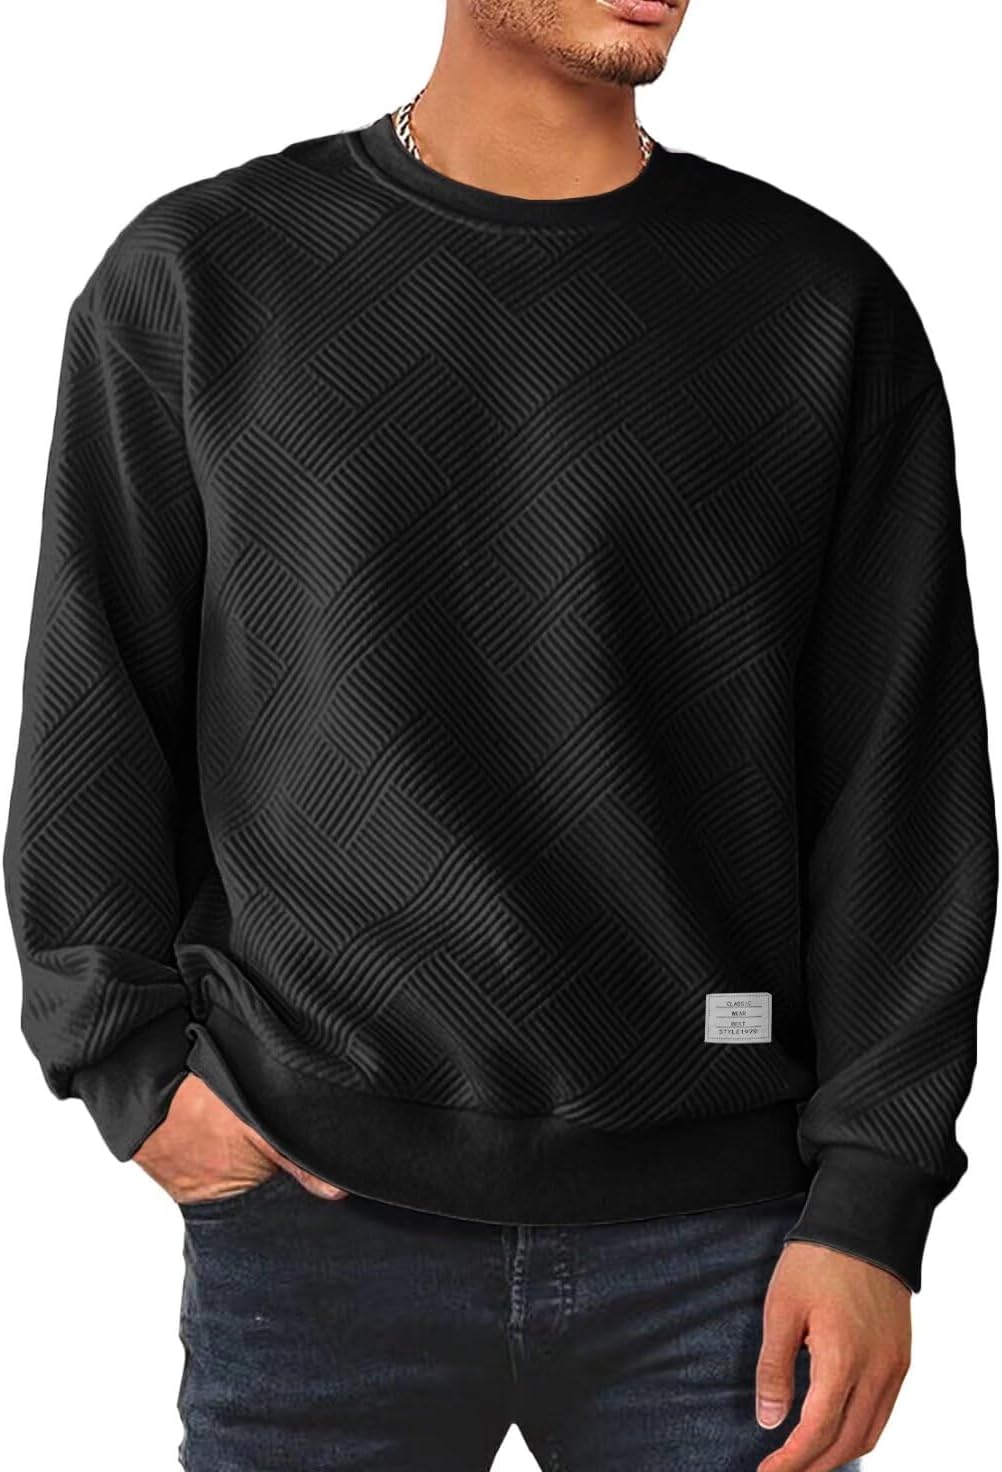 Limited-Time Promo! Shop Now for Dokotoo Men's Crewneck Sweatshirts at 30% Off